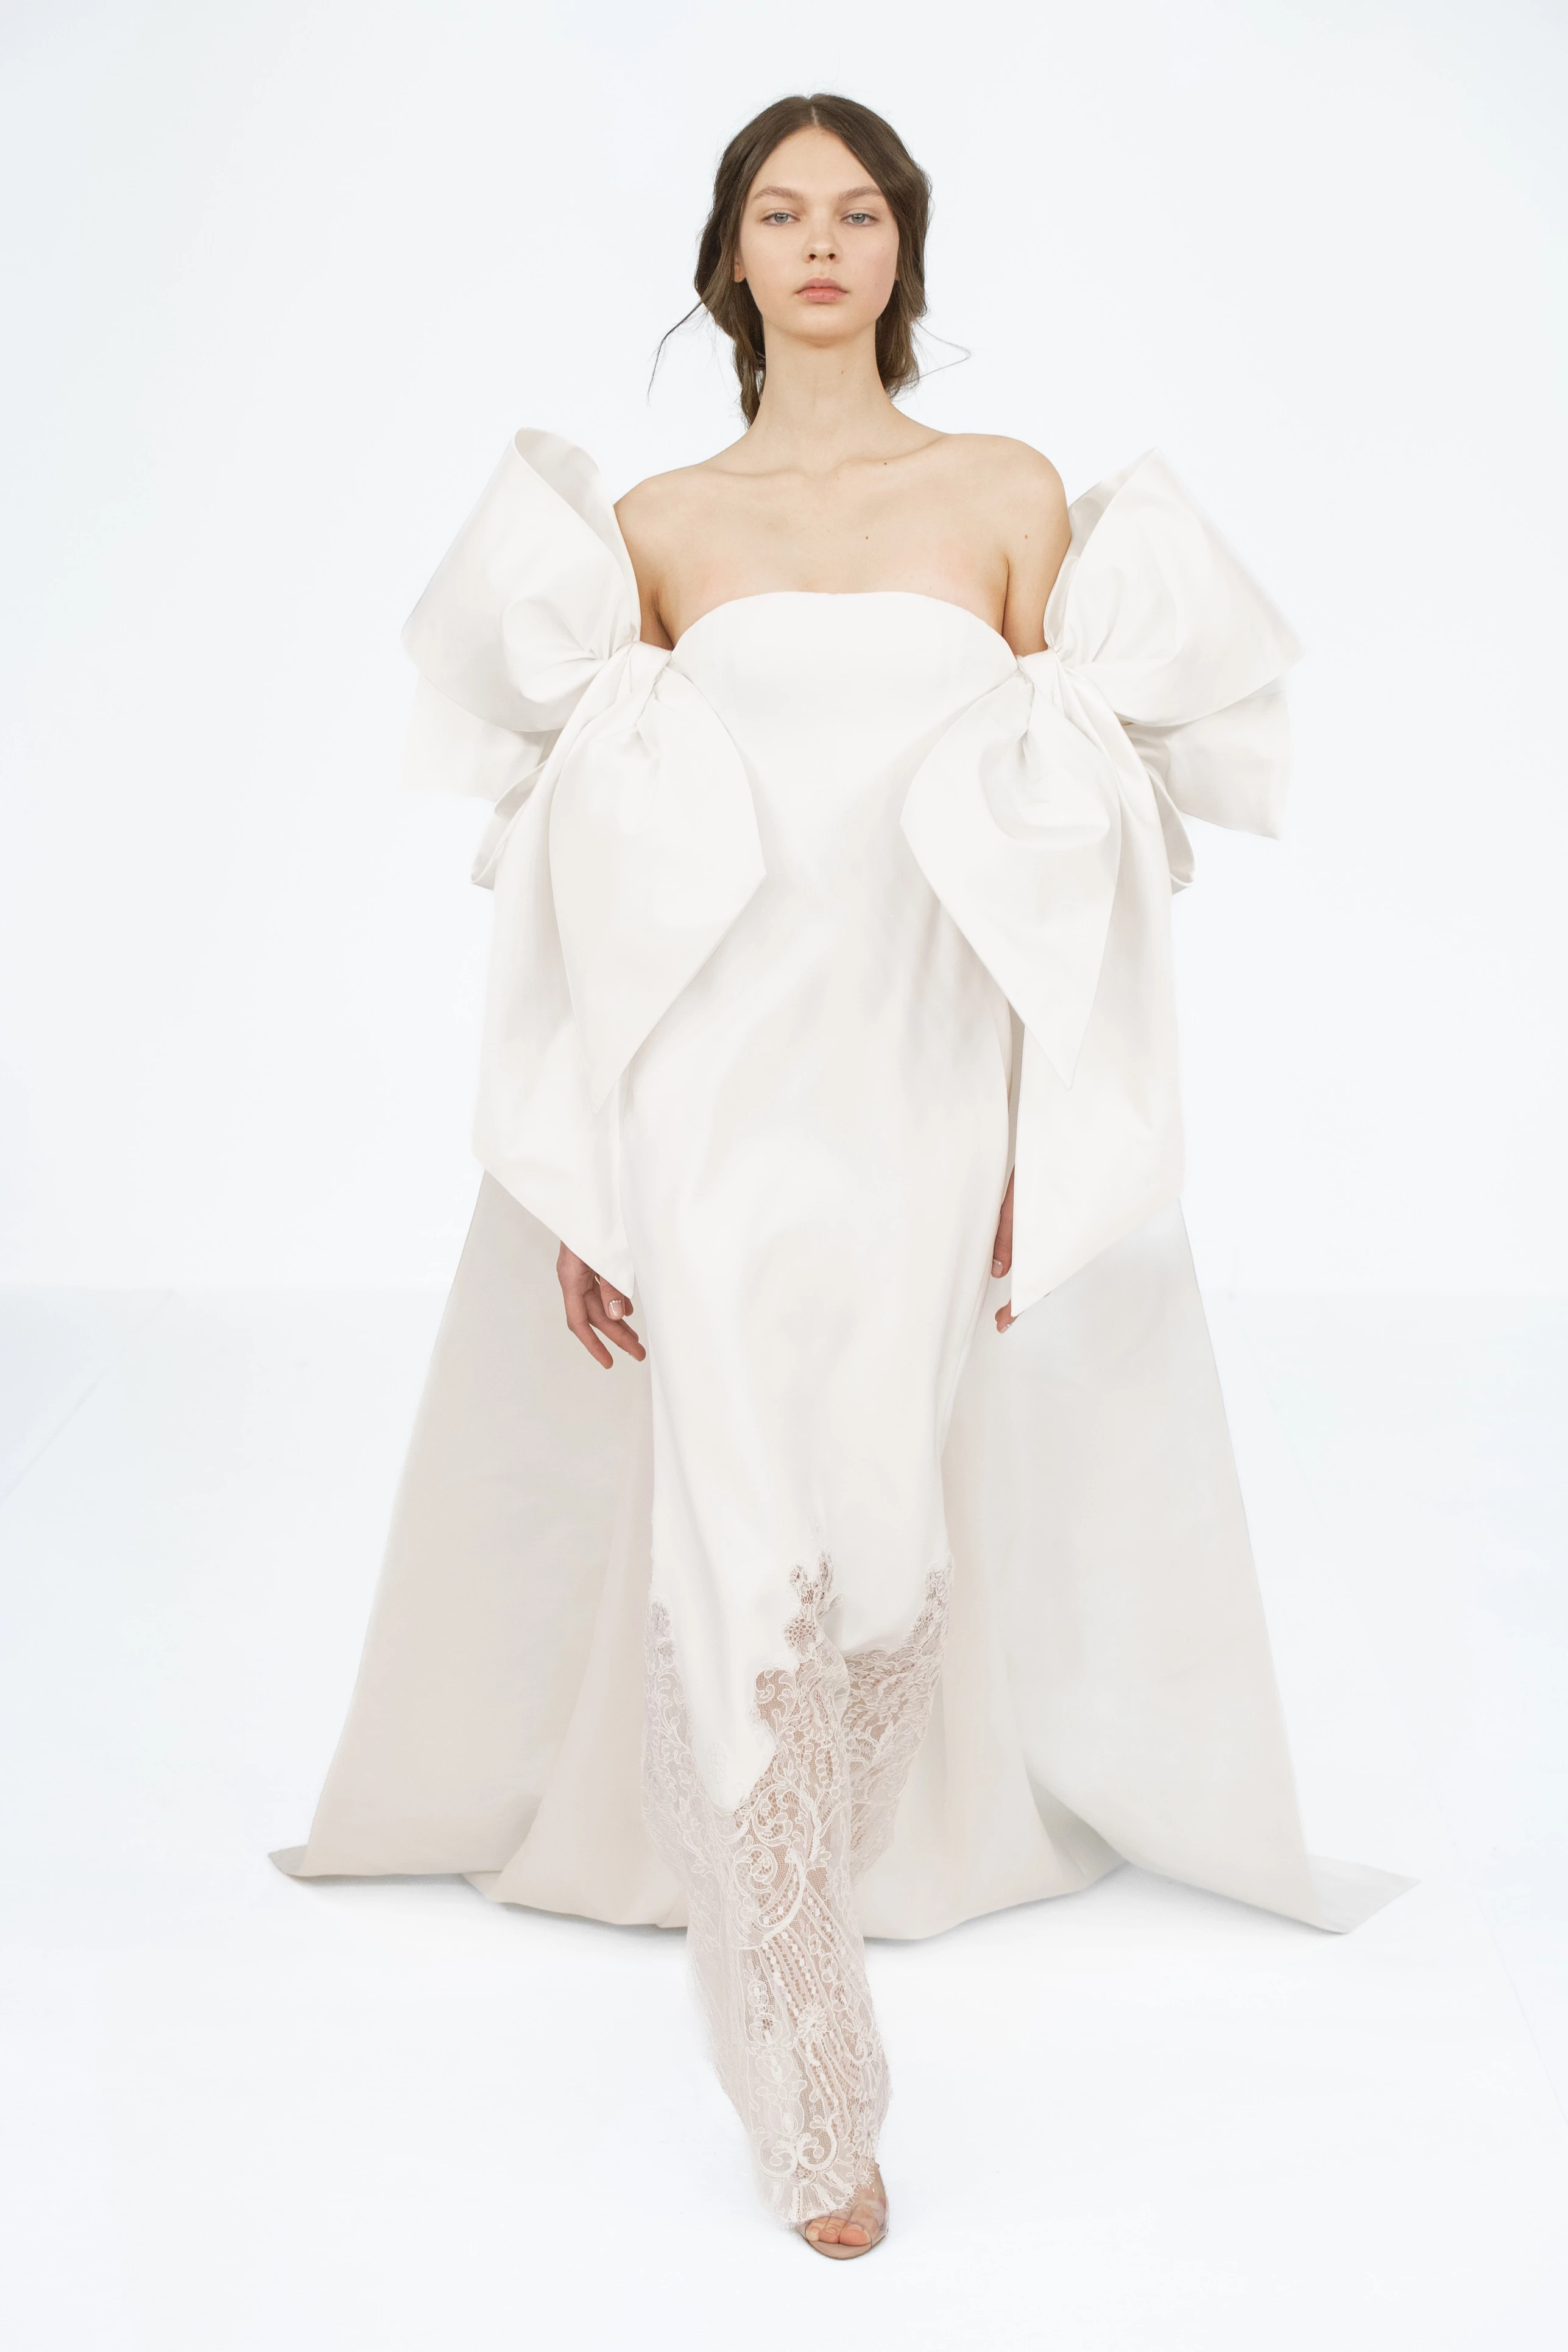 Alexis Mabille Couture30